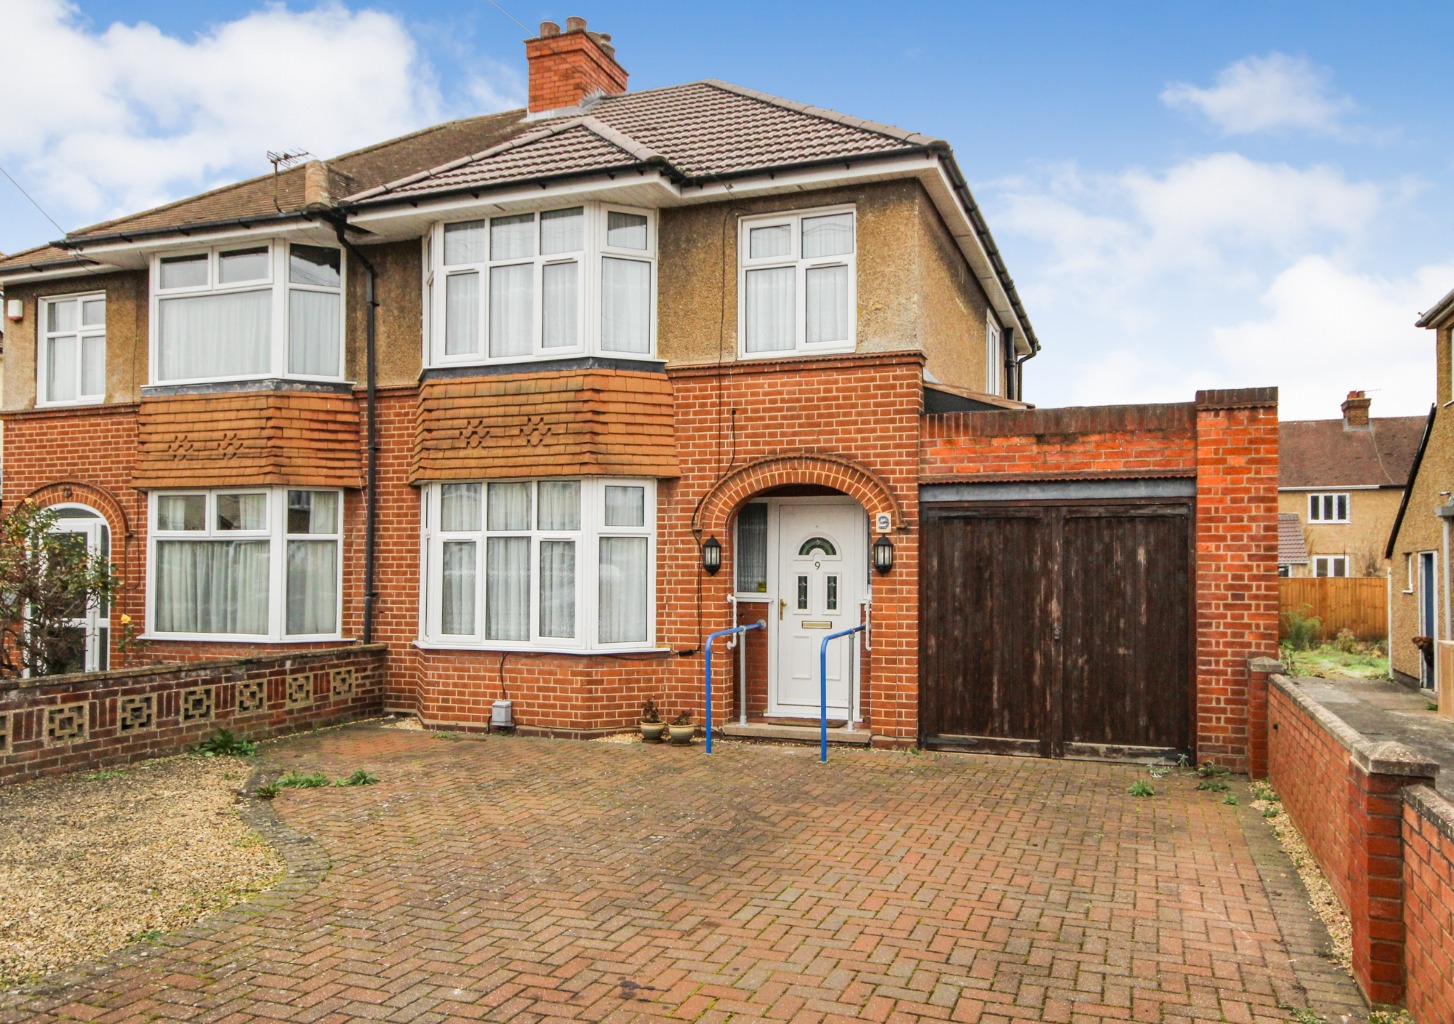 3 bed semi-detached house for sale in Birchdale Avenue, Bedford - Property Image 1